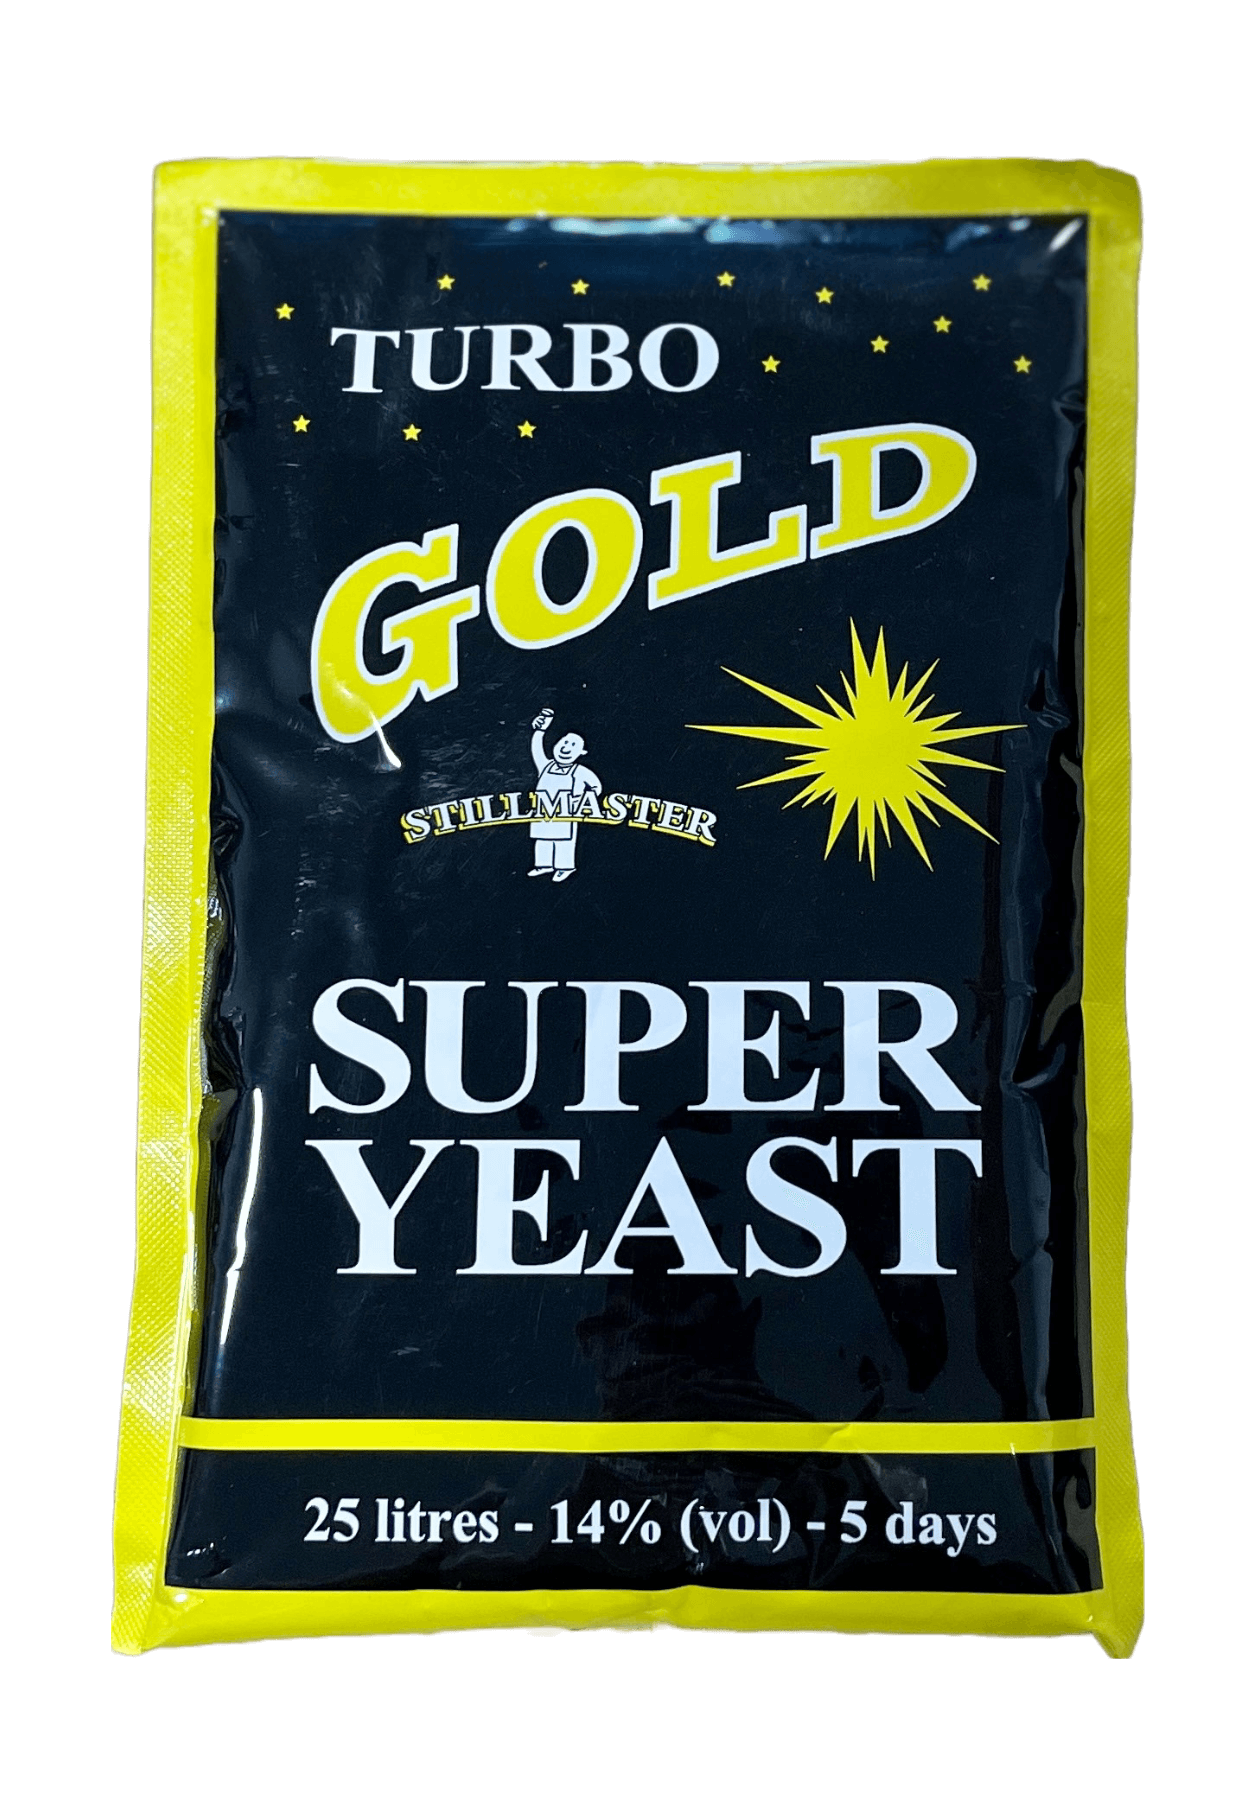 Stillmaster Turbo Gold Super Yeast - All Things Fermented | Home Brew Shop NZ | Supplies | Equipment